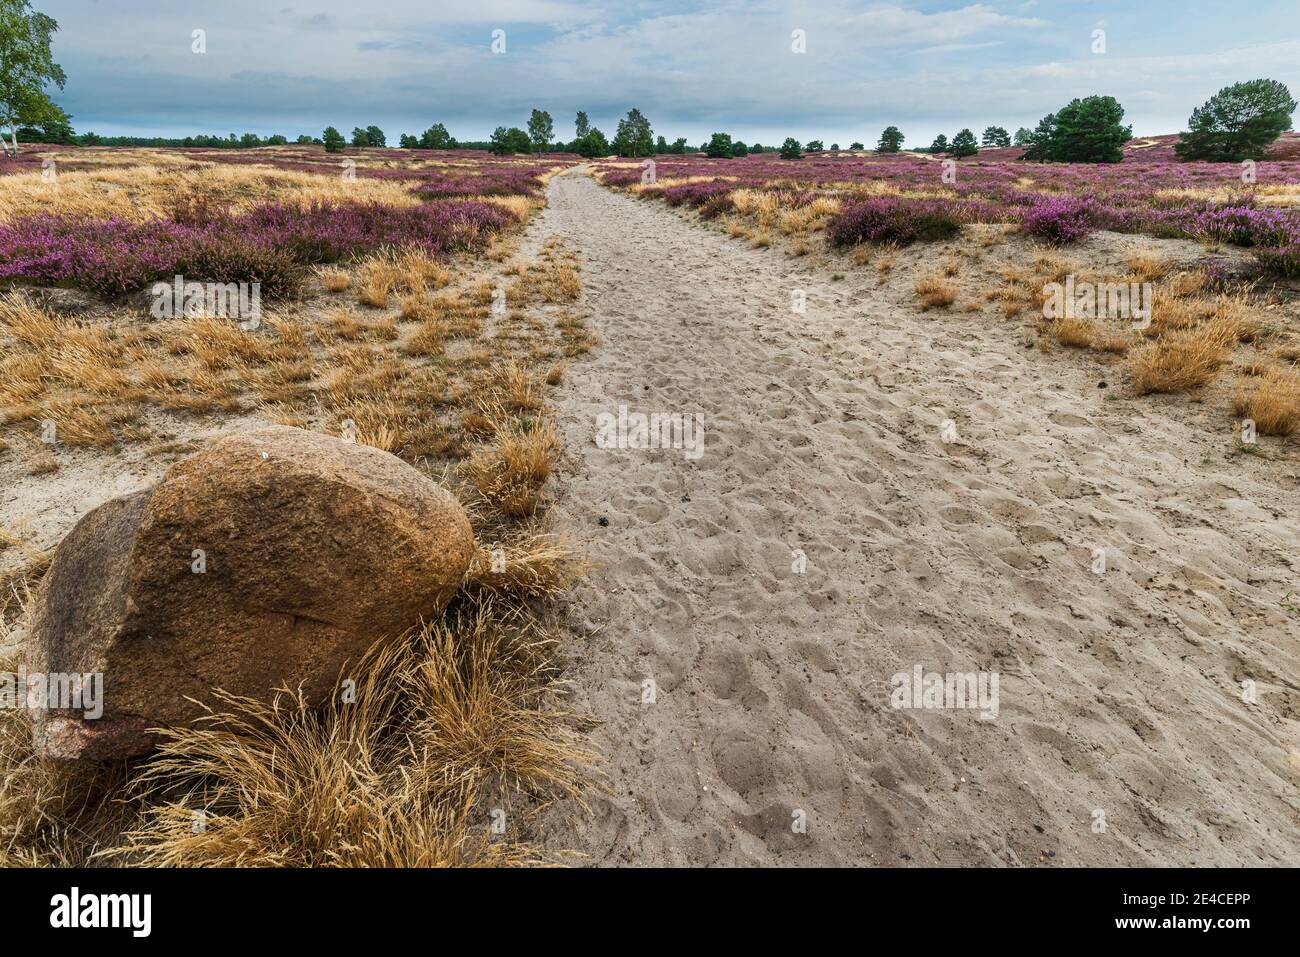 Landscape shot of the Nemitzer Heide in Wendland with a boulder in the foreground Stock Photo